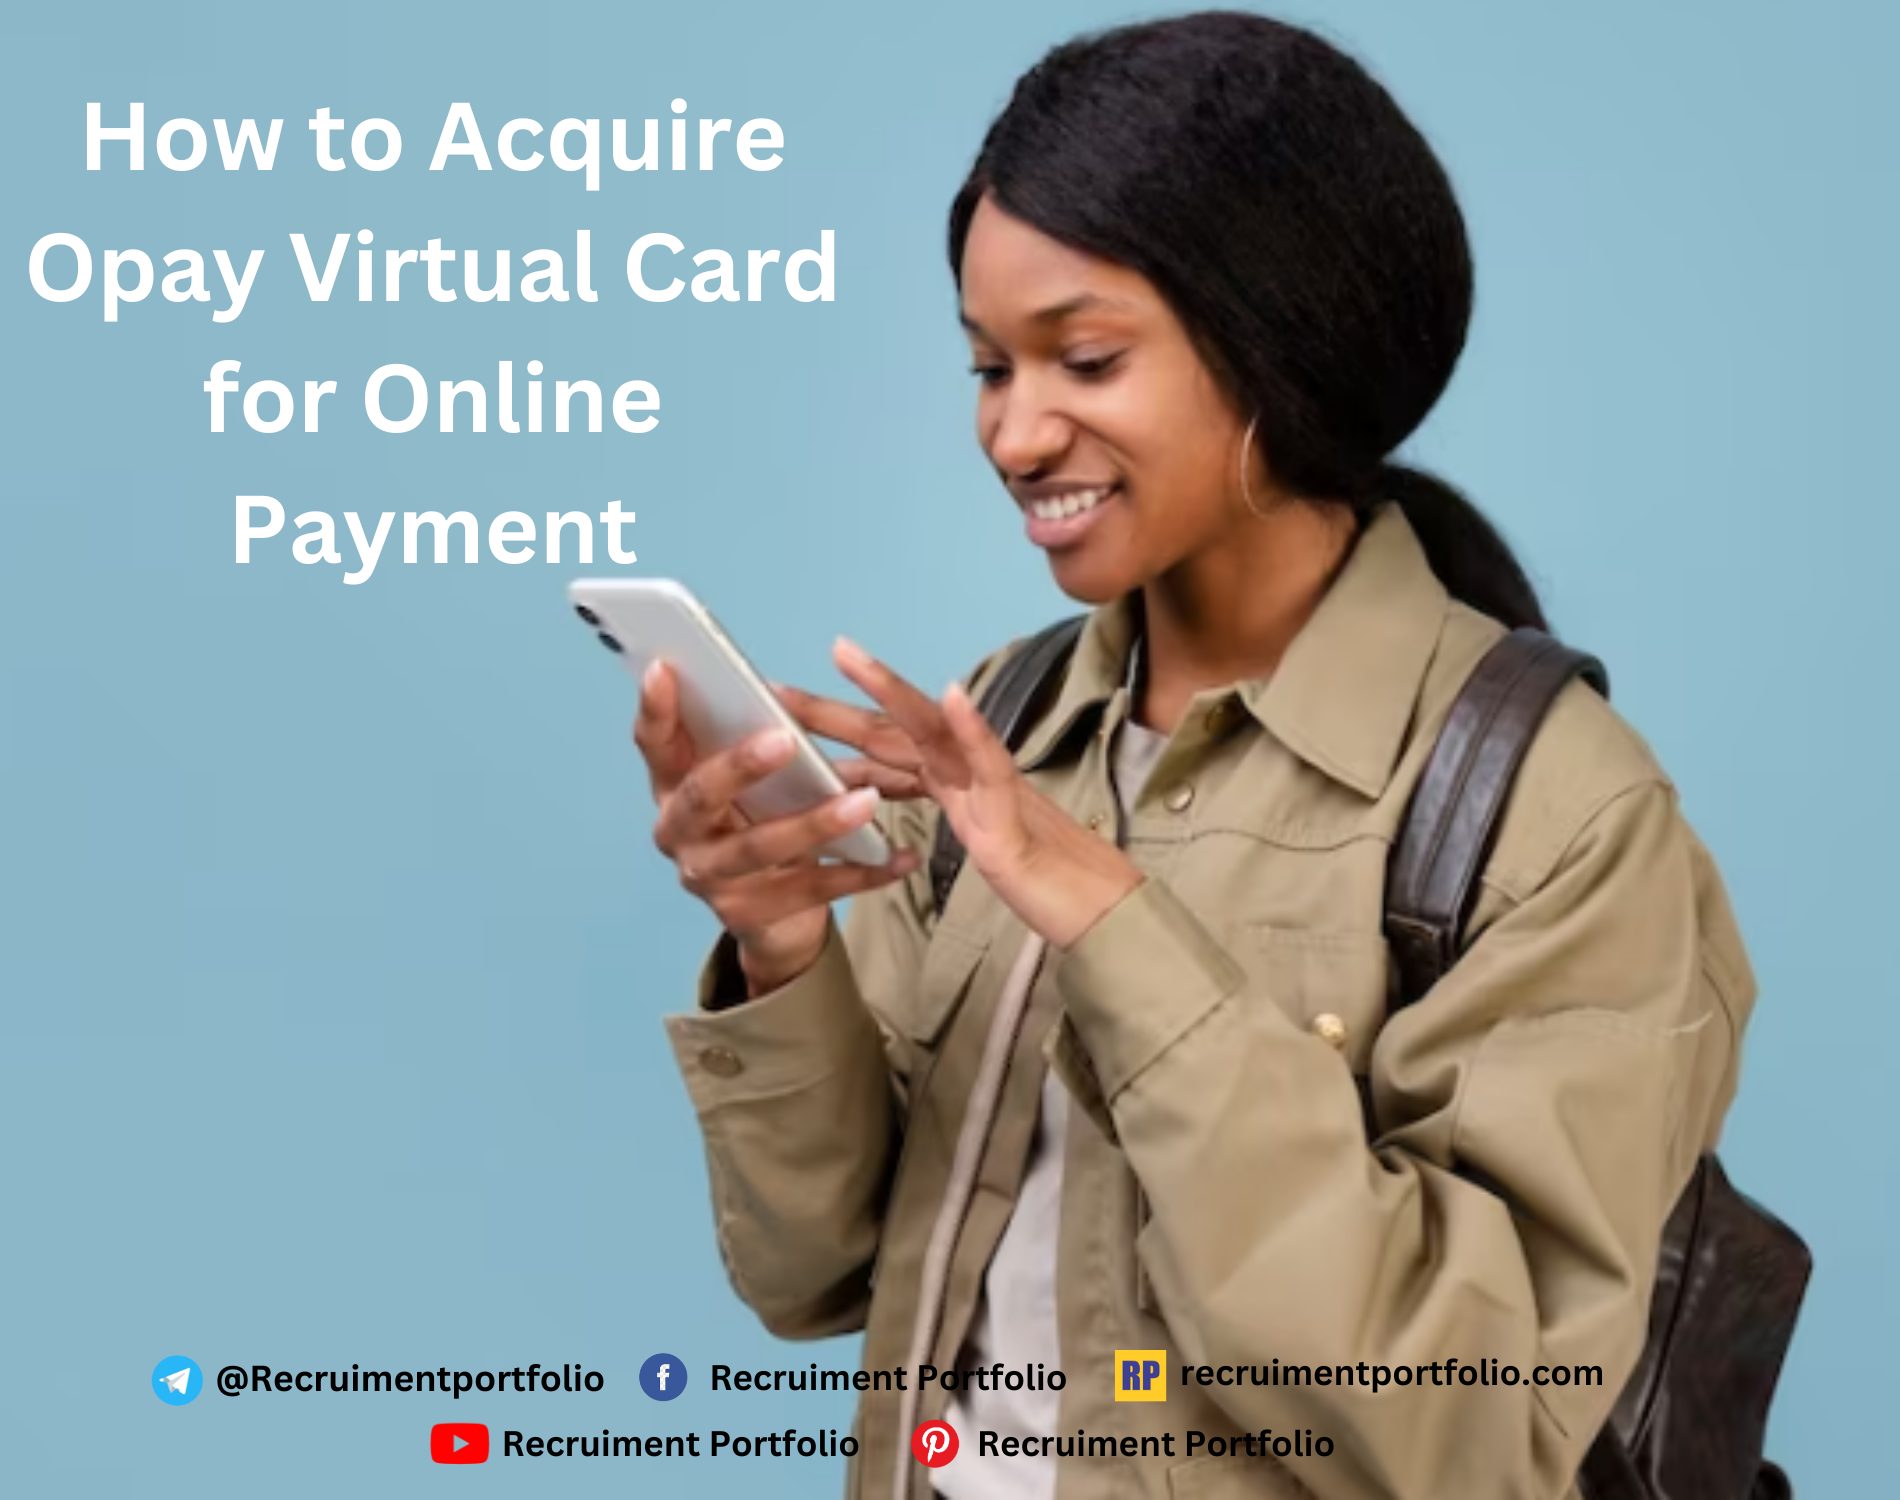 How to Acquire Opay Virtual Card for Online Payment